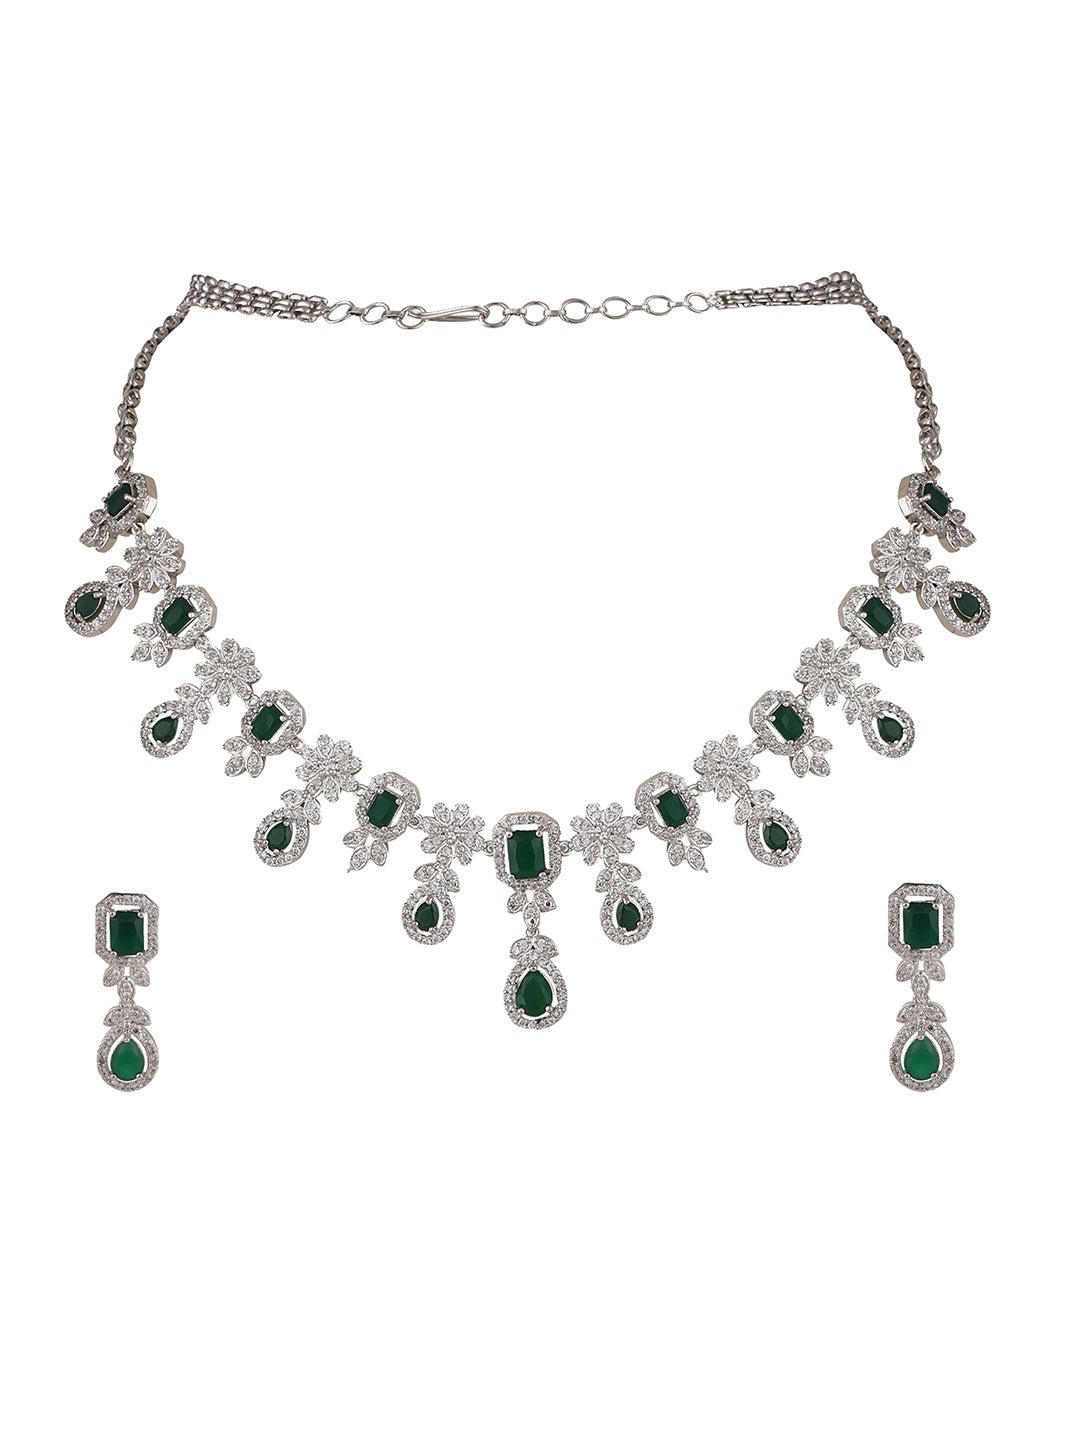 Women's Silver Plated AD & Emerald Green Stone Studded Jewellery Set - Anikas Creation